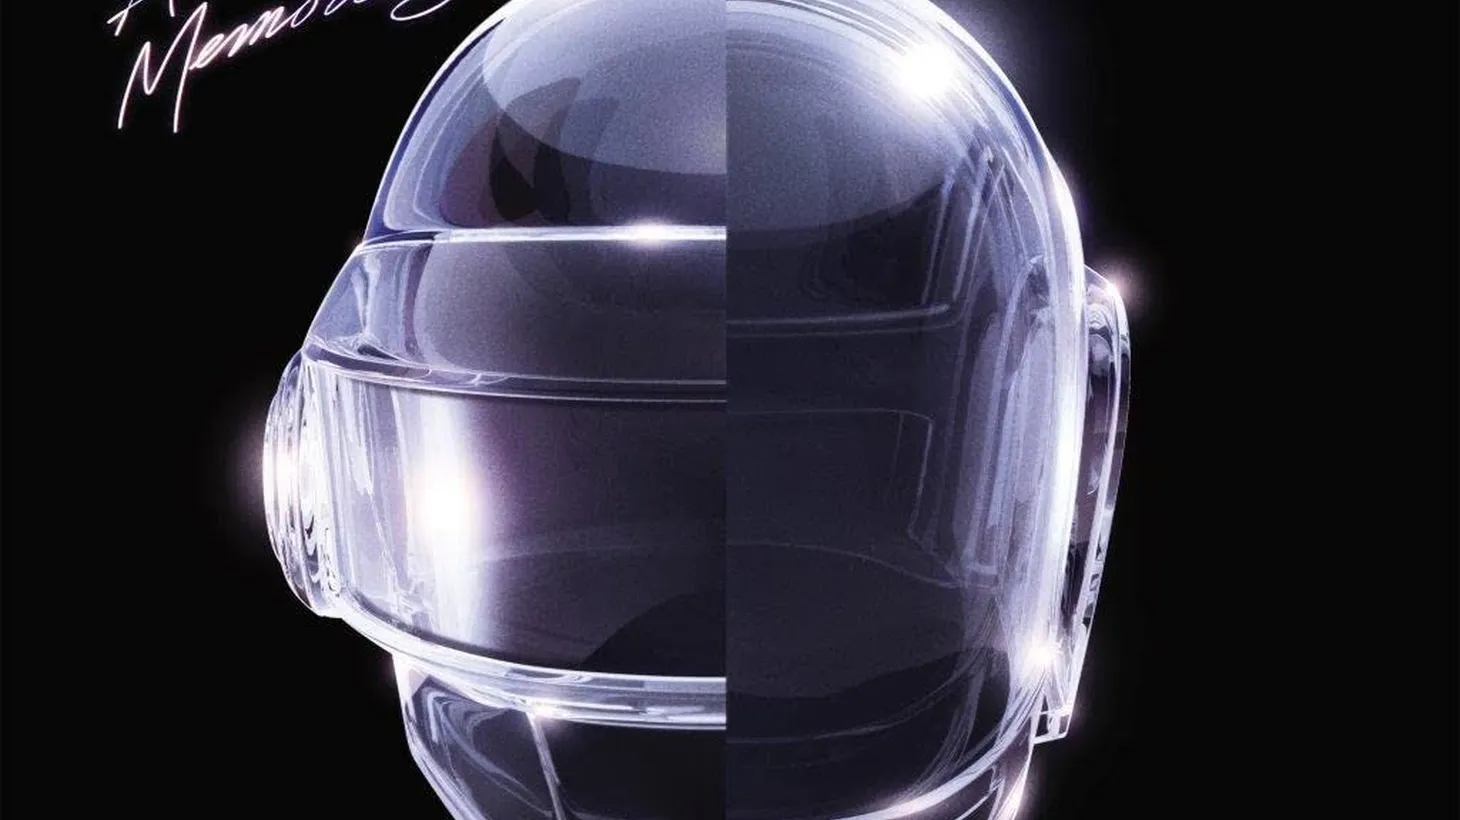 Access your deepest nostalgia with Daft Punk’s “Random Access Memories” at 10.